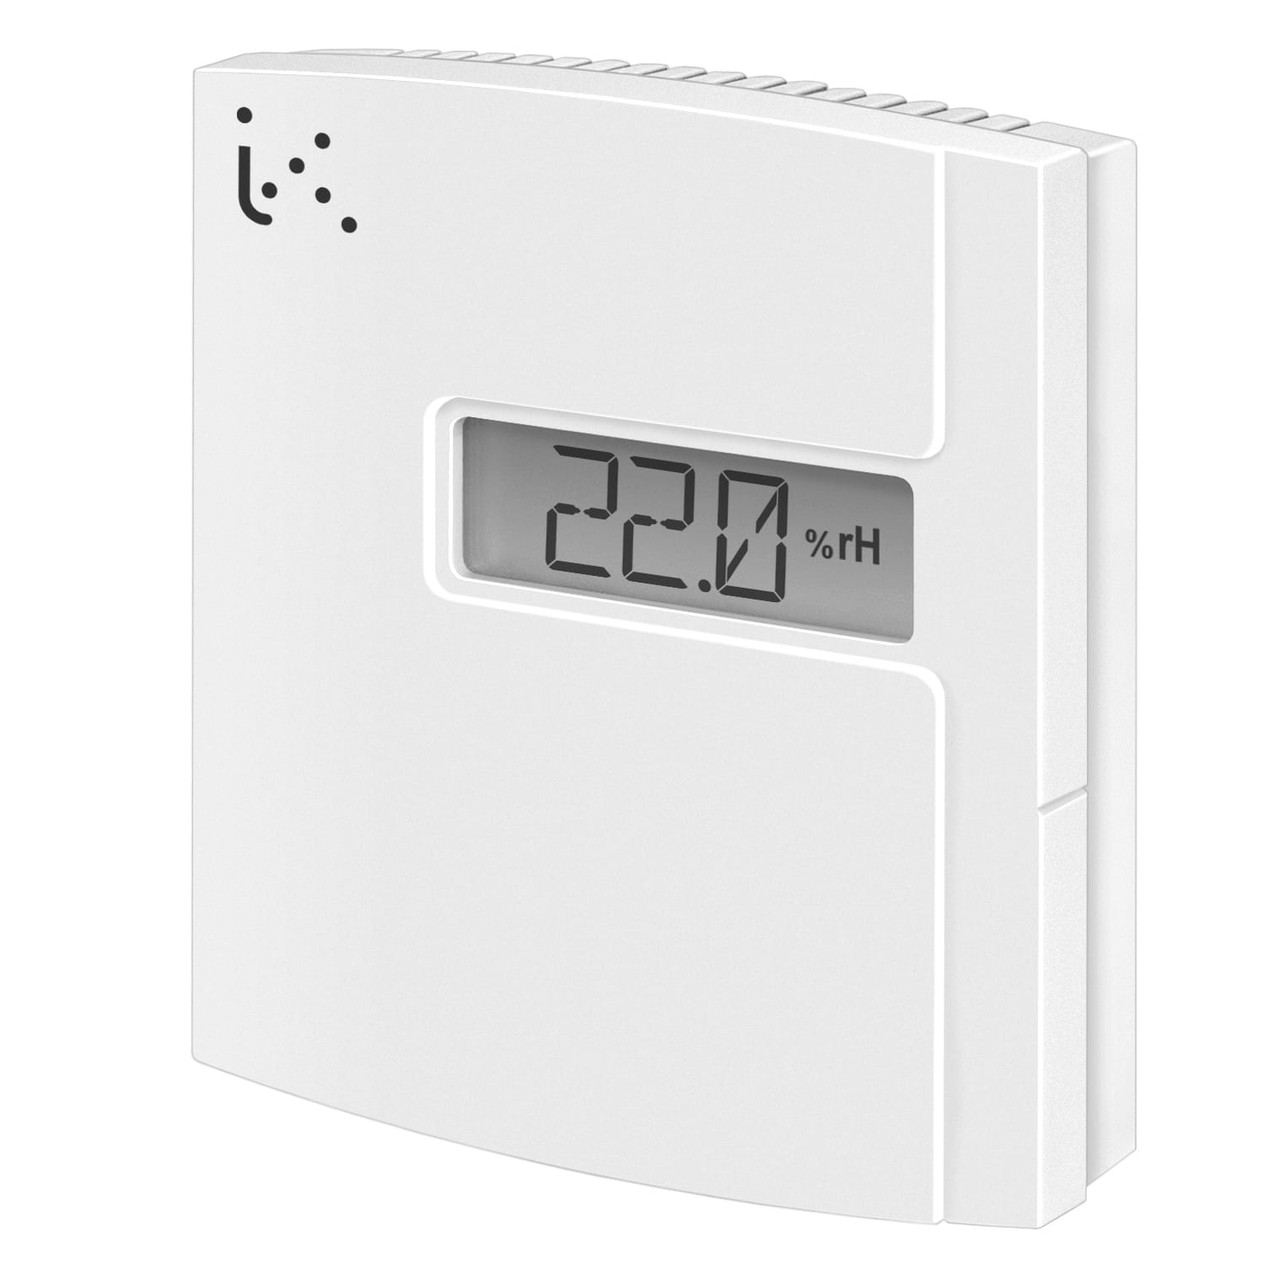 TTUA-D-NTC1.8 Humidity And Temperature Transmitter For Room Mounting Ip30 P12201